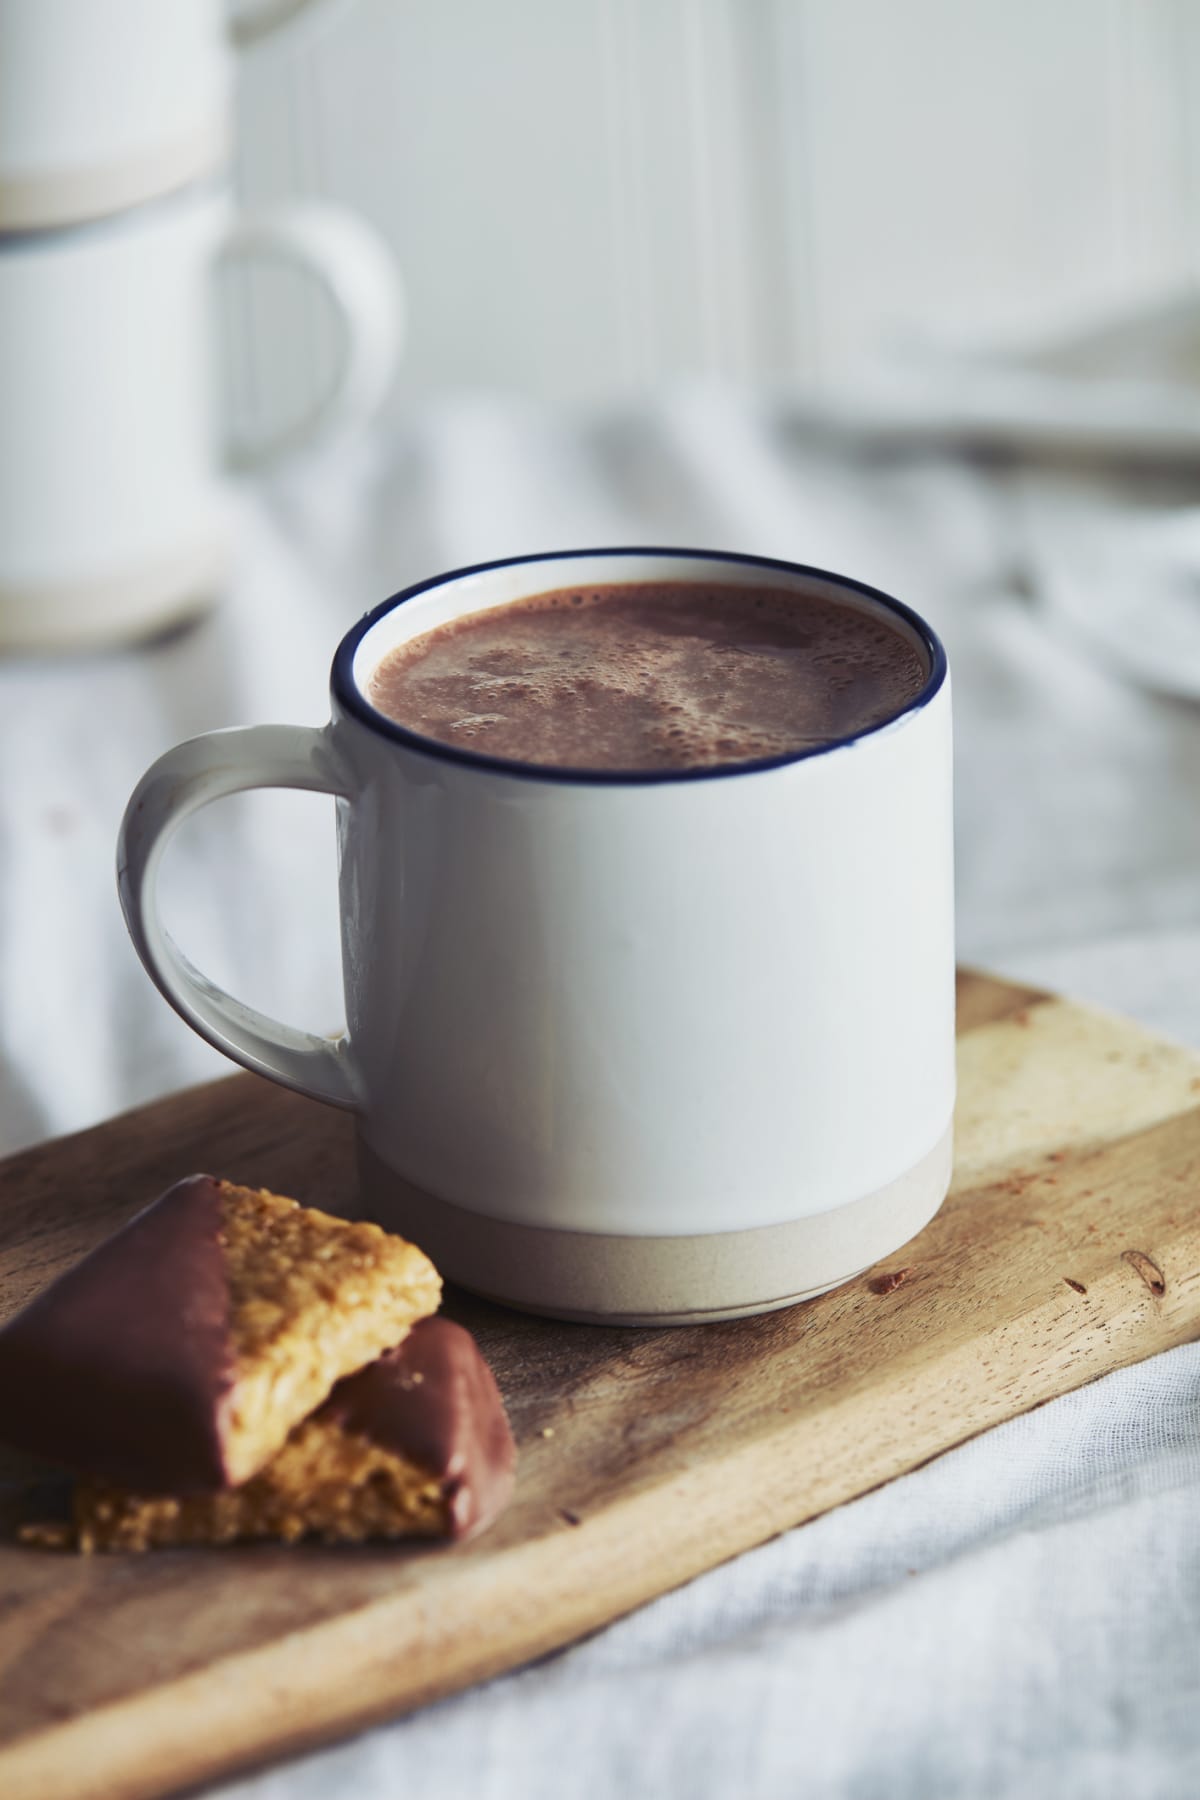 Hot chocolate in mug on wooden board, next to cookie